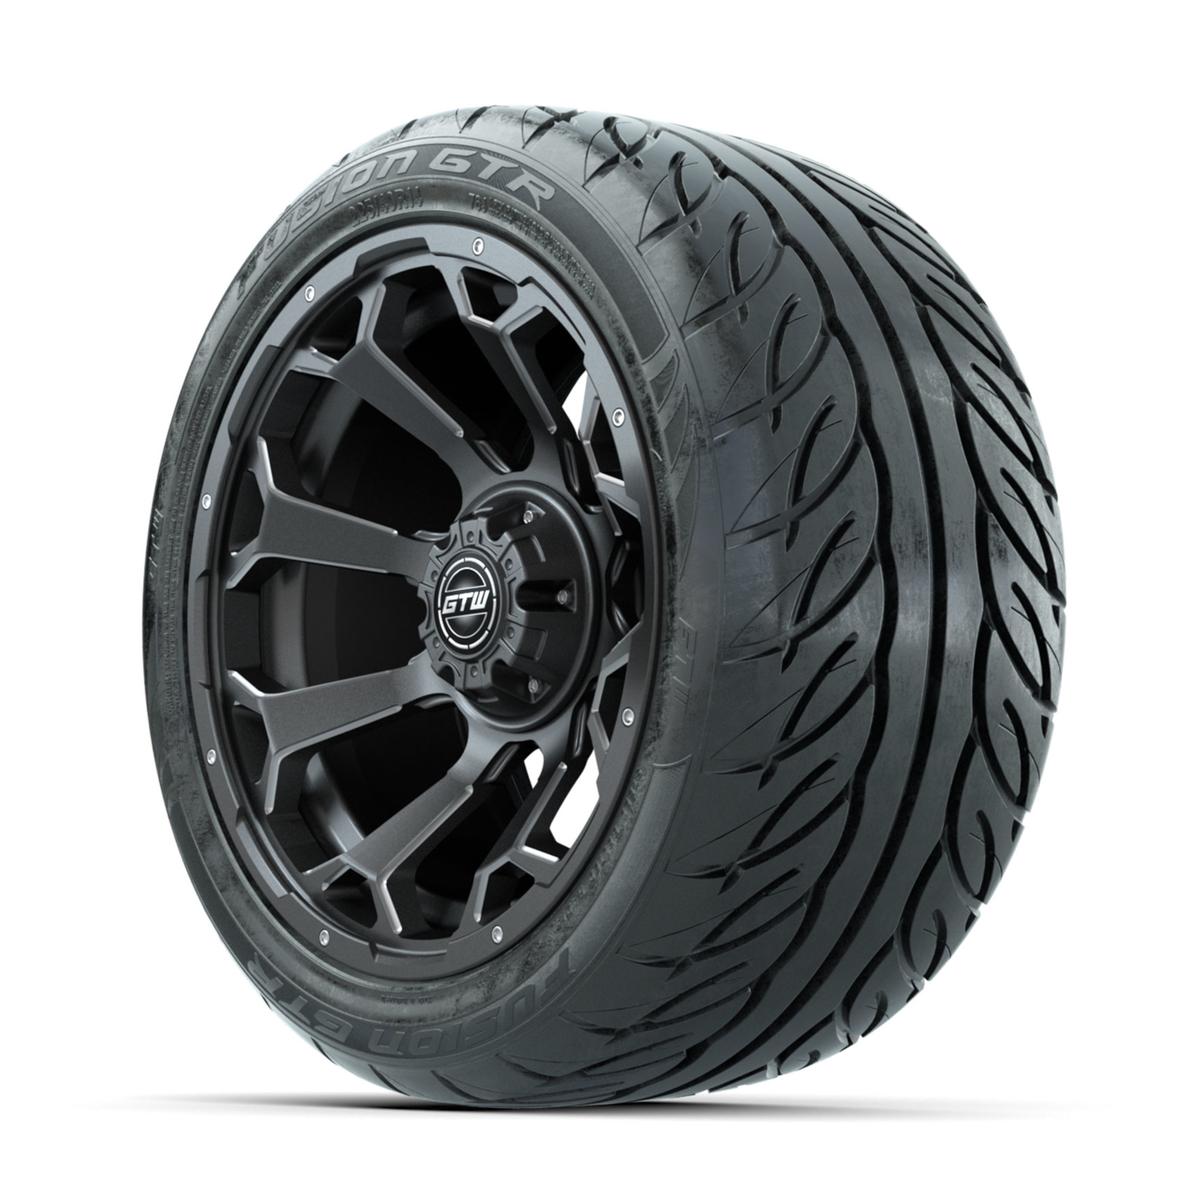 GTW Raven Off-Road Matte Grey 14 in Wheels with 225/40-R14 Fusion GTR Street Tires – Full Set